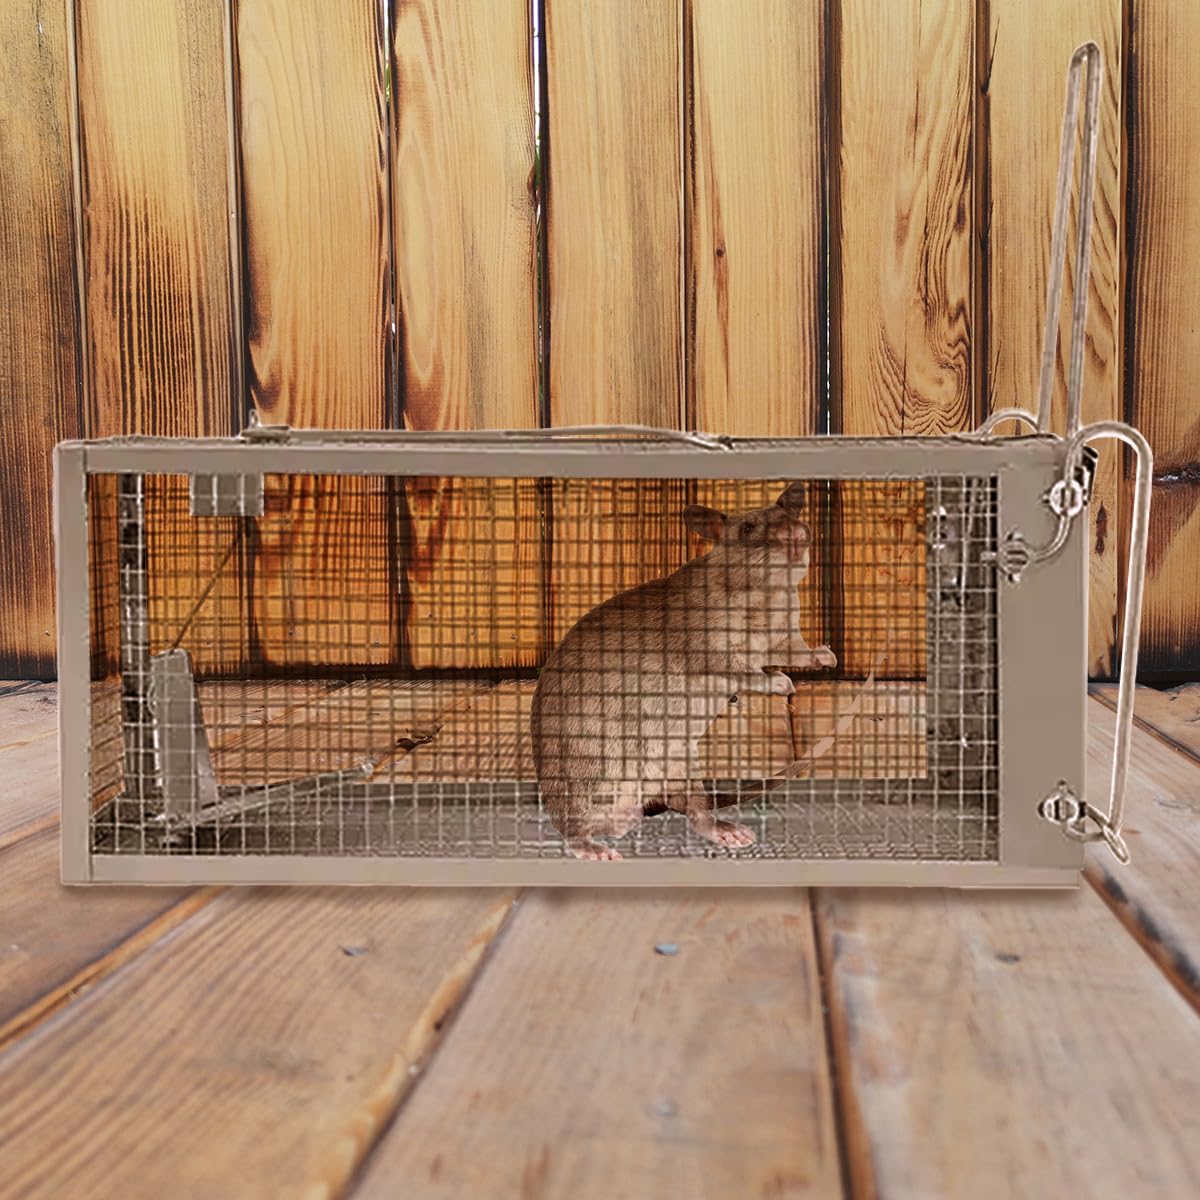 Chipmunk Trap -2 Pack, Squirell and Rat Trap Cages That Works, Humane Mouse Trap for Home | Catch and Release | Reusable and Durable | No Kill Animal Trap | for Inside Home and Outdoor Use